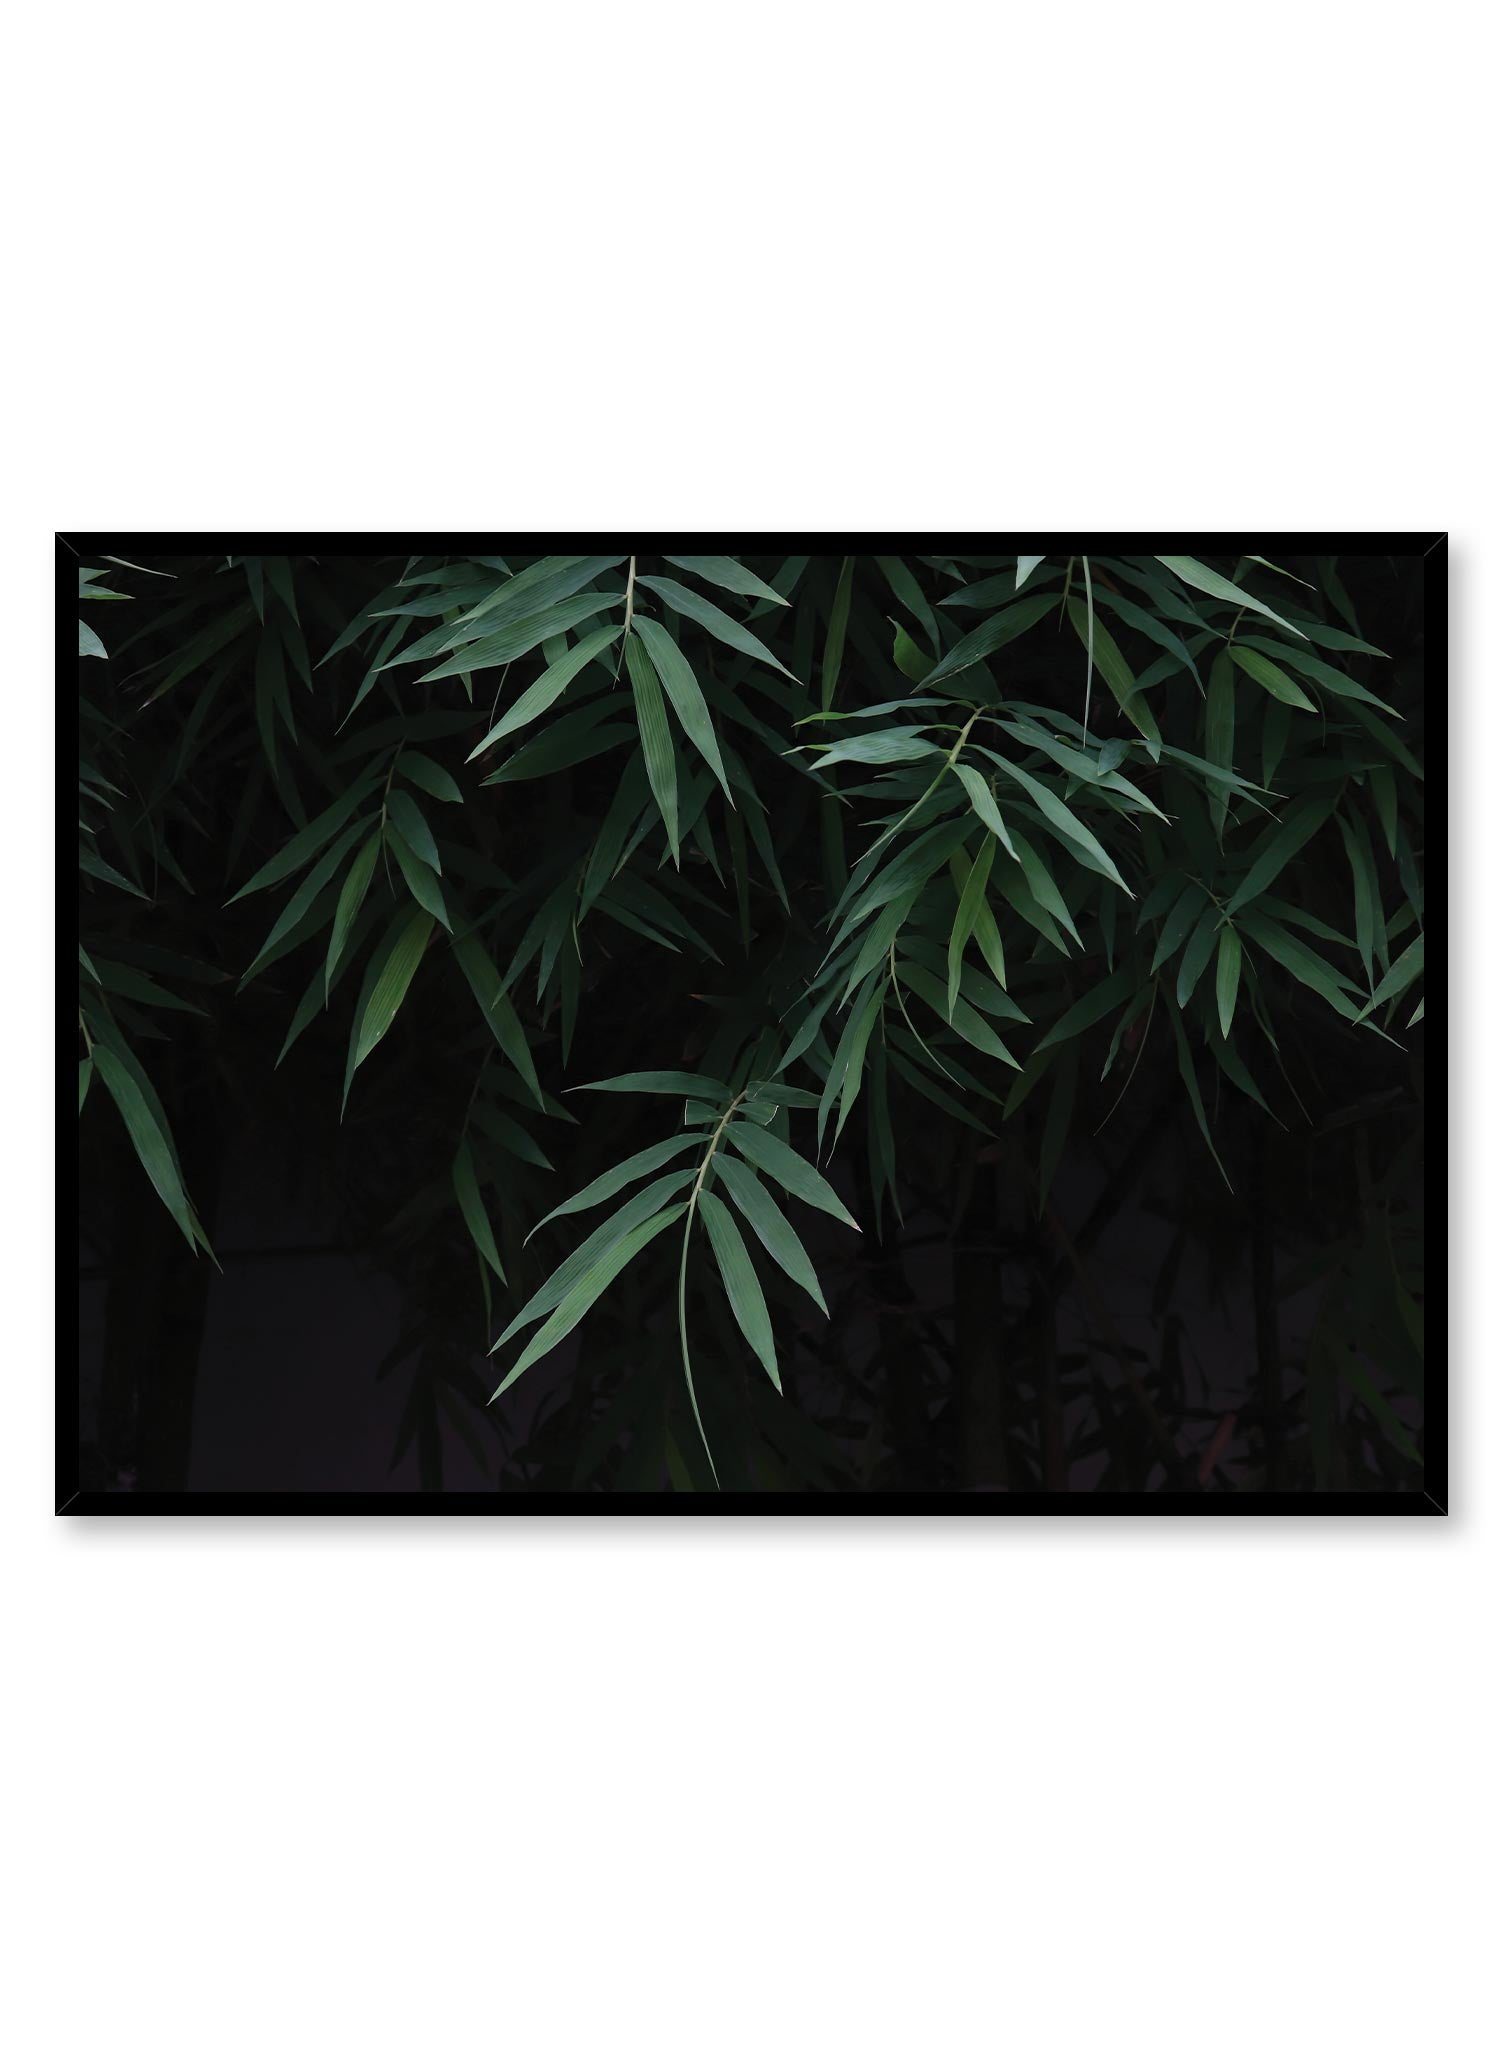 Verdant is a minimalist photography by Opposite Wall of many bamboo leaves on their branches.